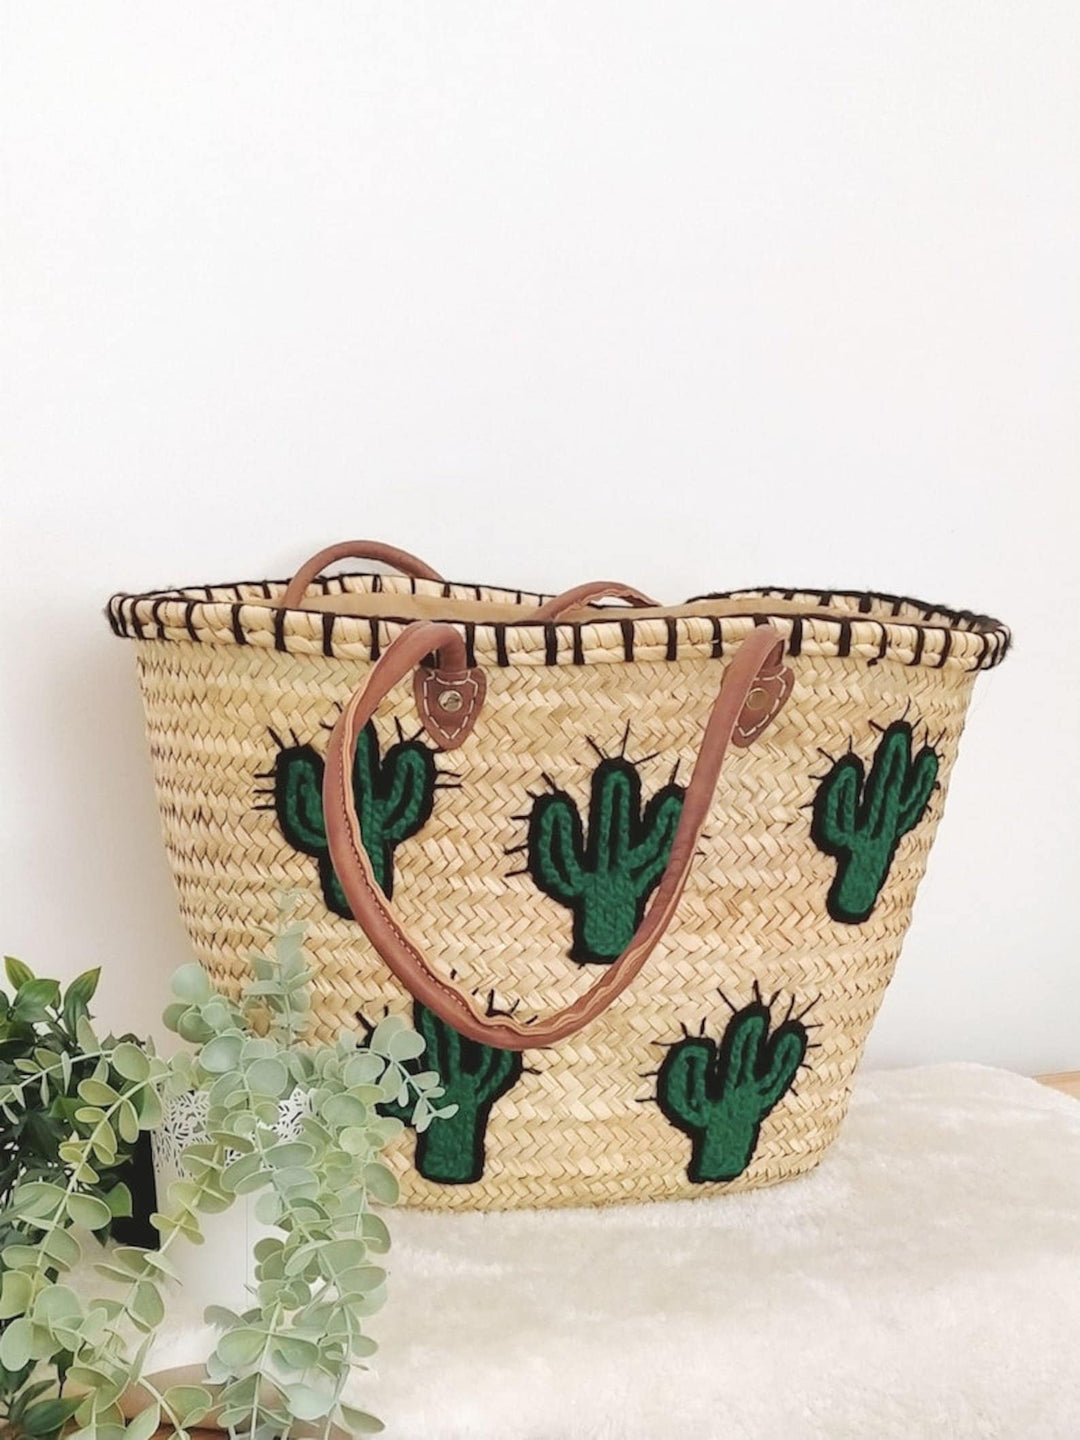 French Market Straw Basket Handmade with Leather Handles